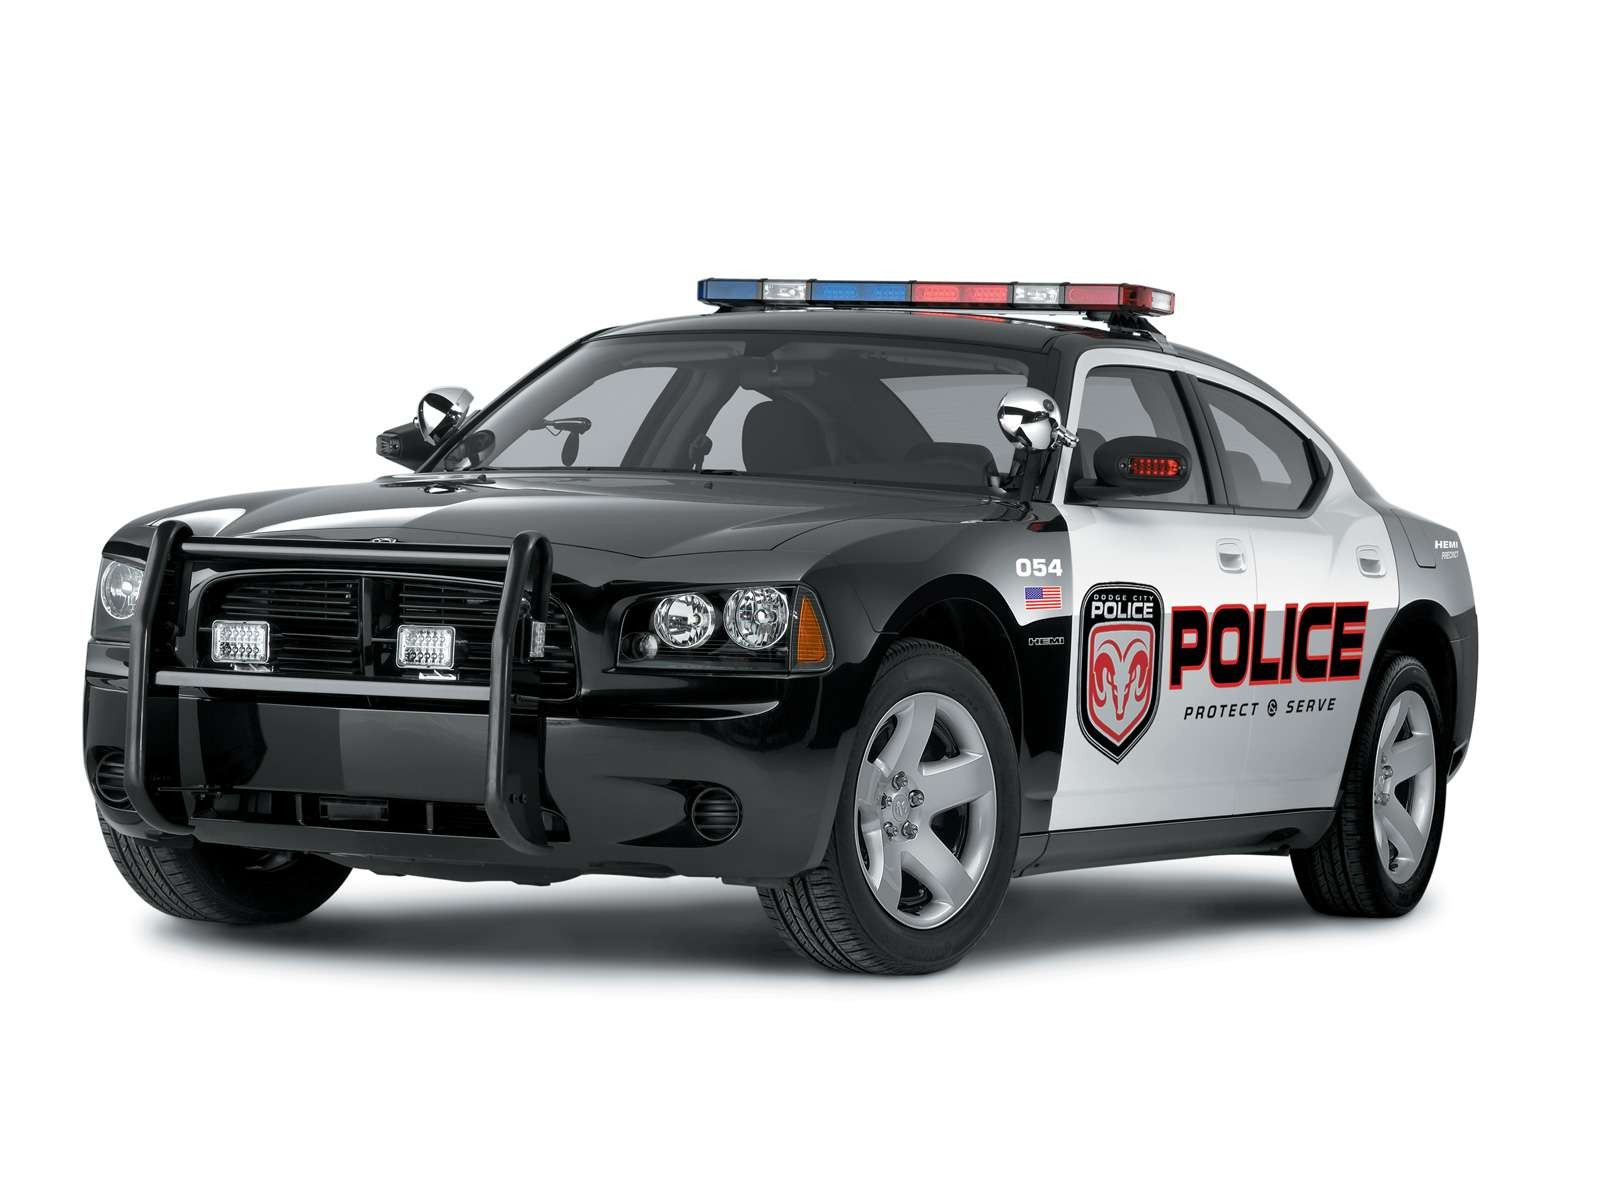 General 1600x1200 Dodge Charger vehicle police police cars simple background white background black cars Dodge car American cars Stellantis